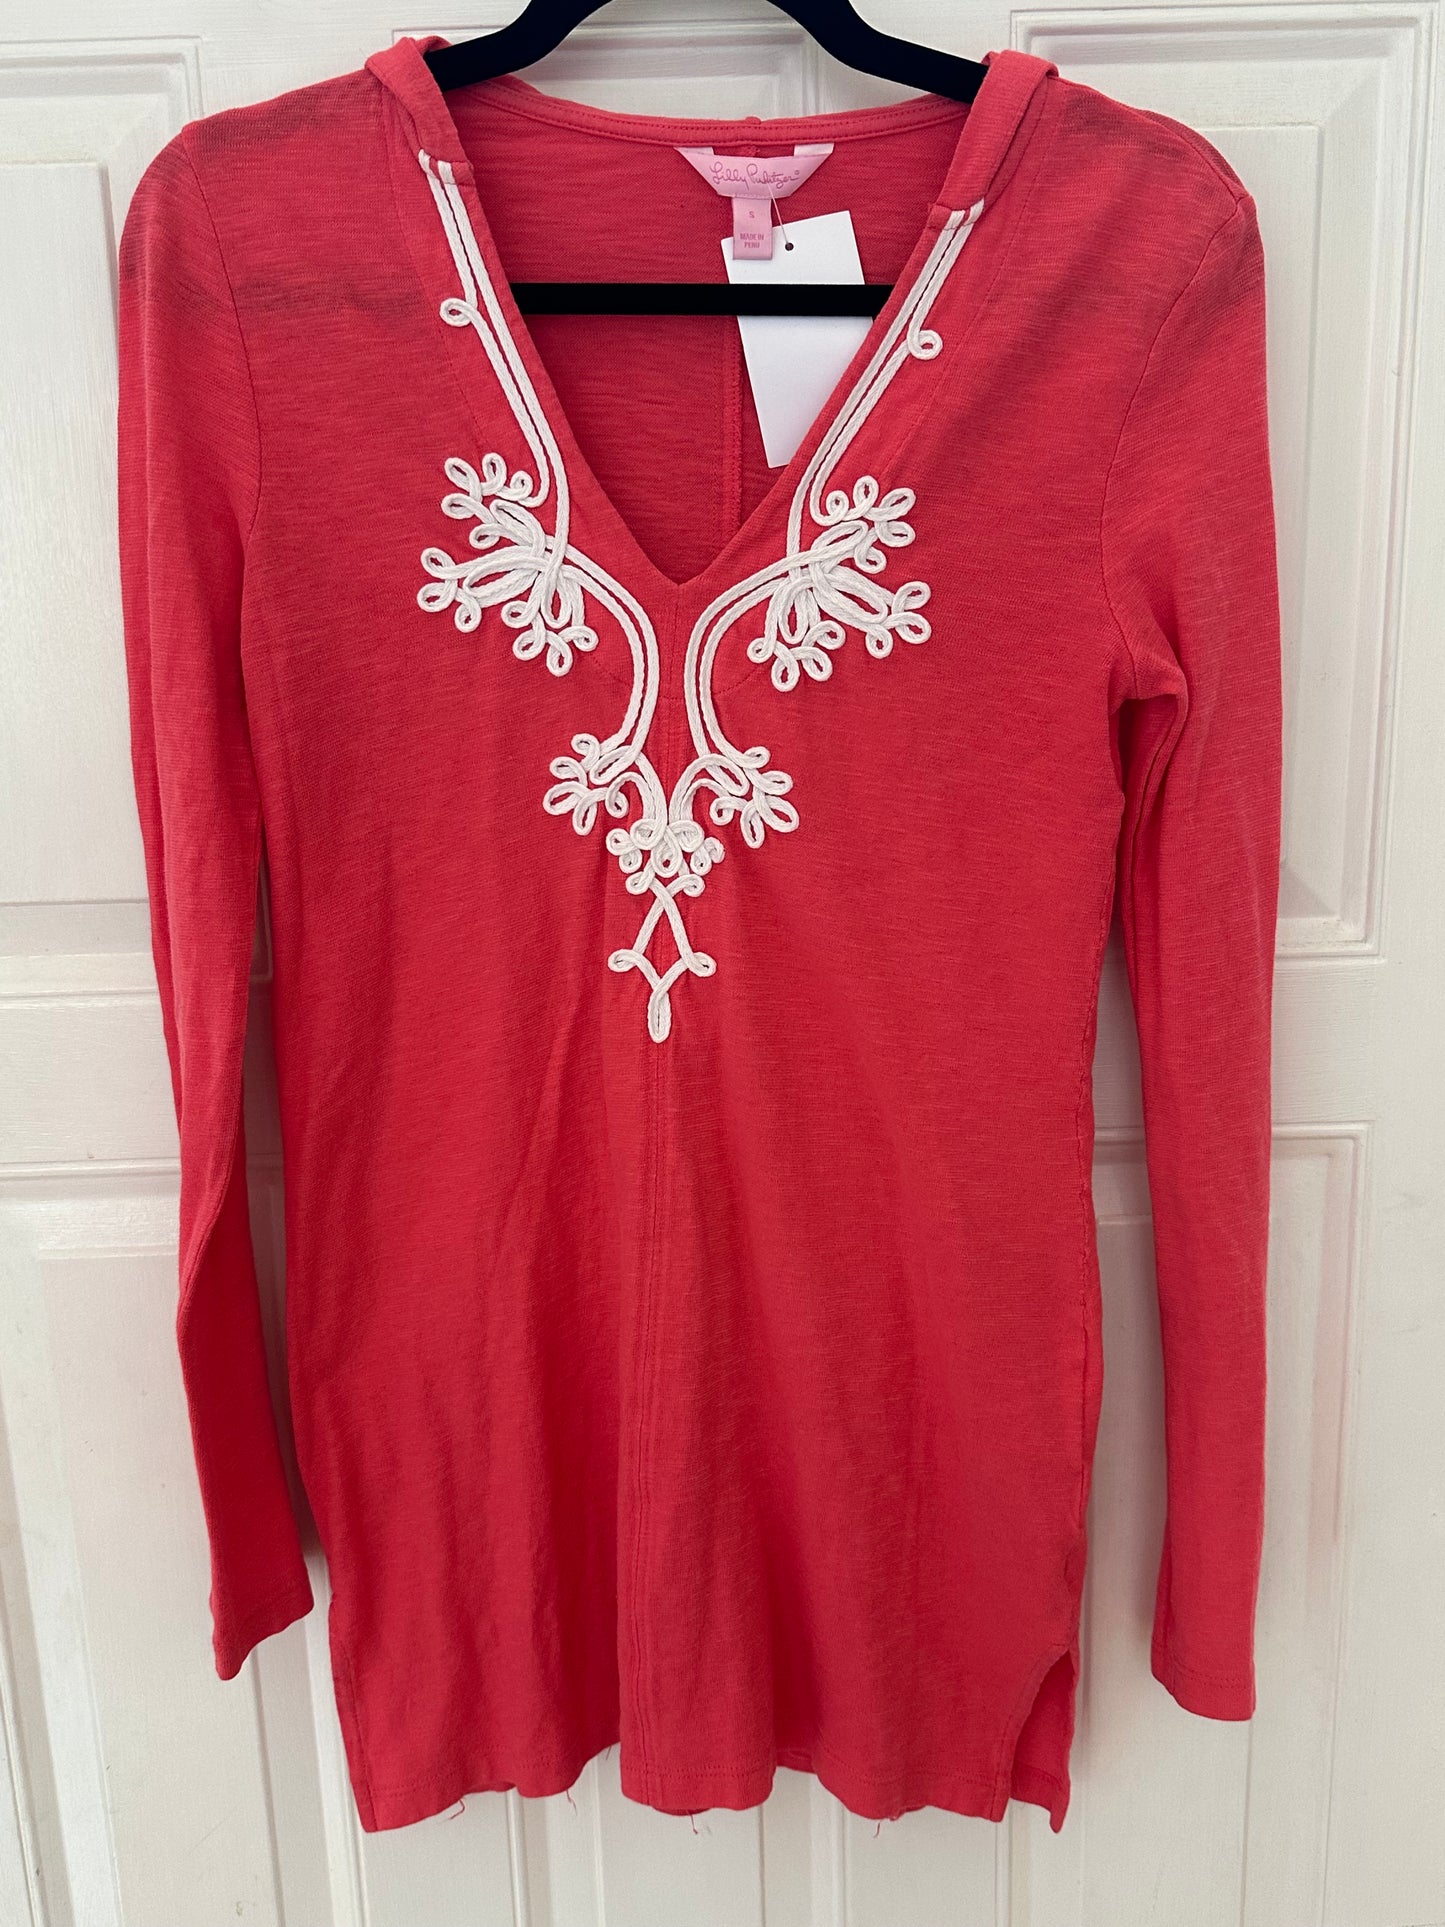 Lilly Pulitzer Pink Tunic Sz Small Cotton Top Hooded